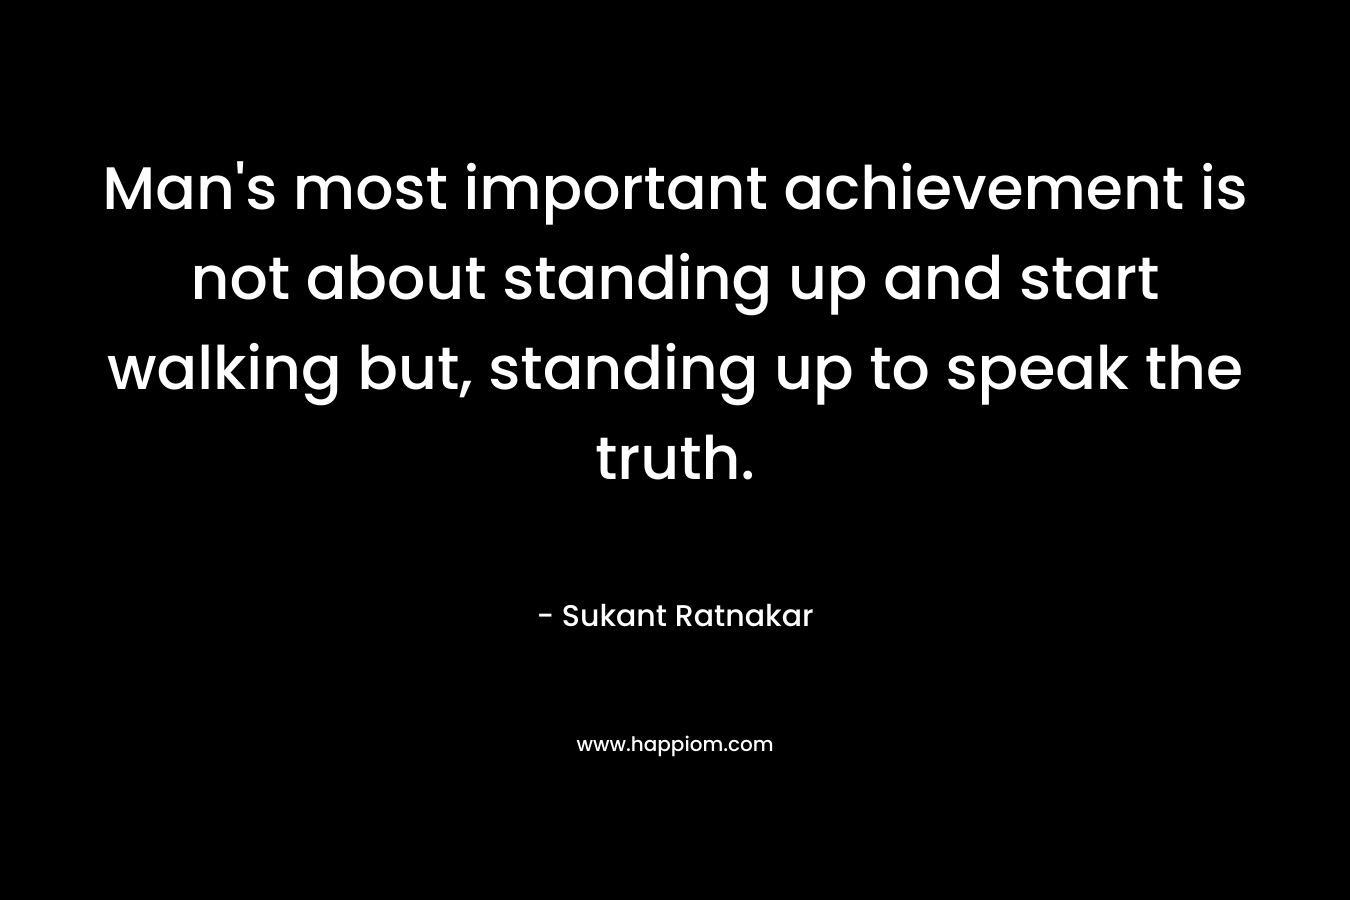 Man’s most important achievement is not about standing up and start walking but, standing up to speak the truth. – Sukant Ratnakar